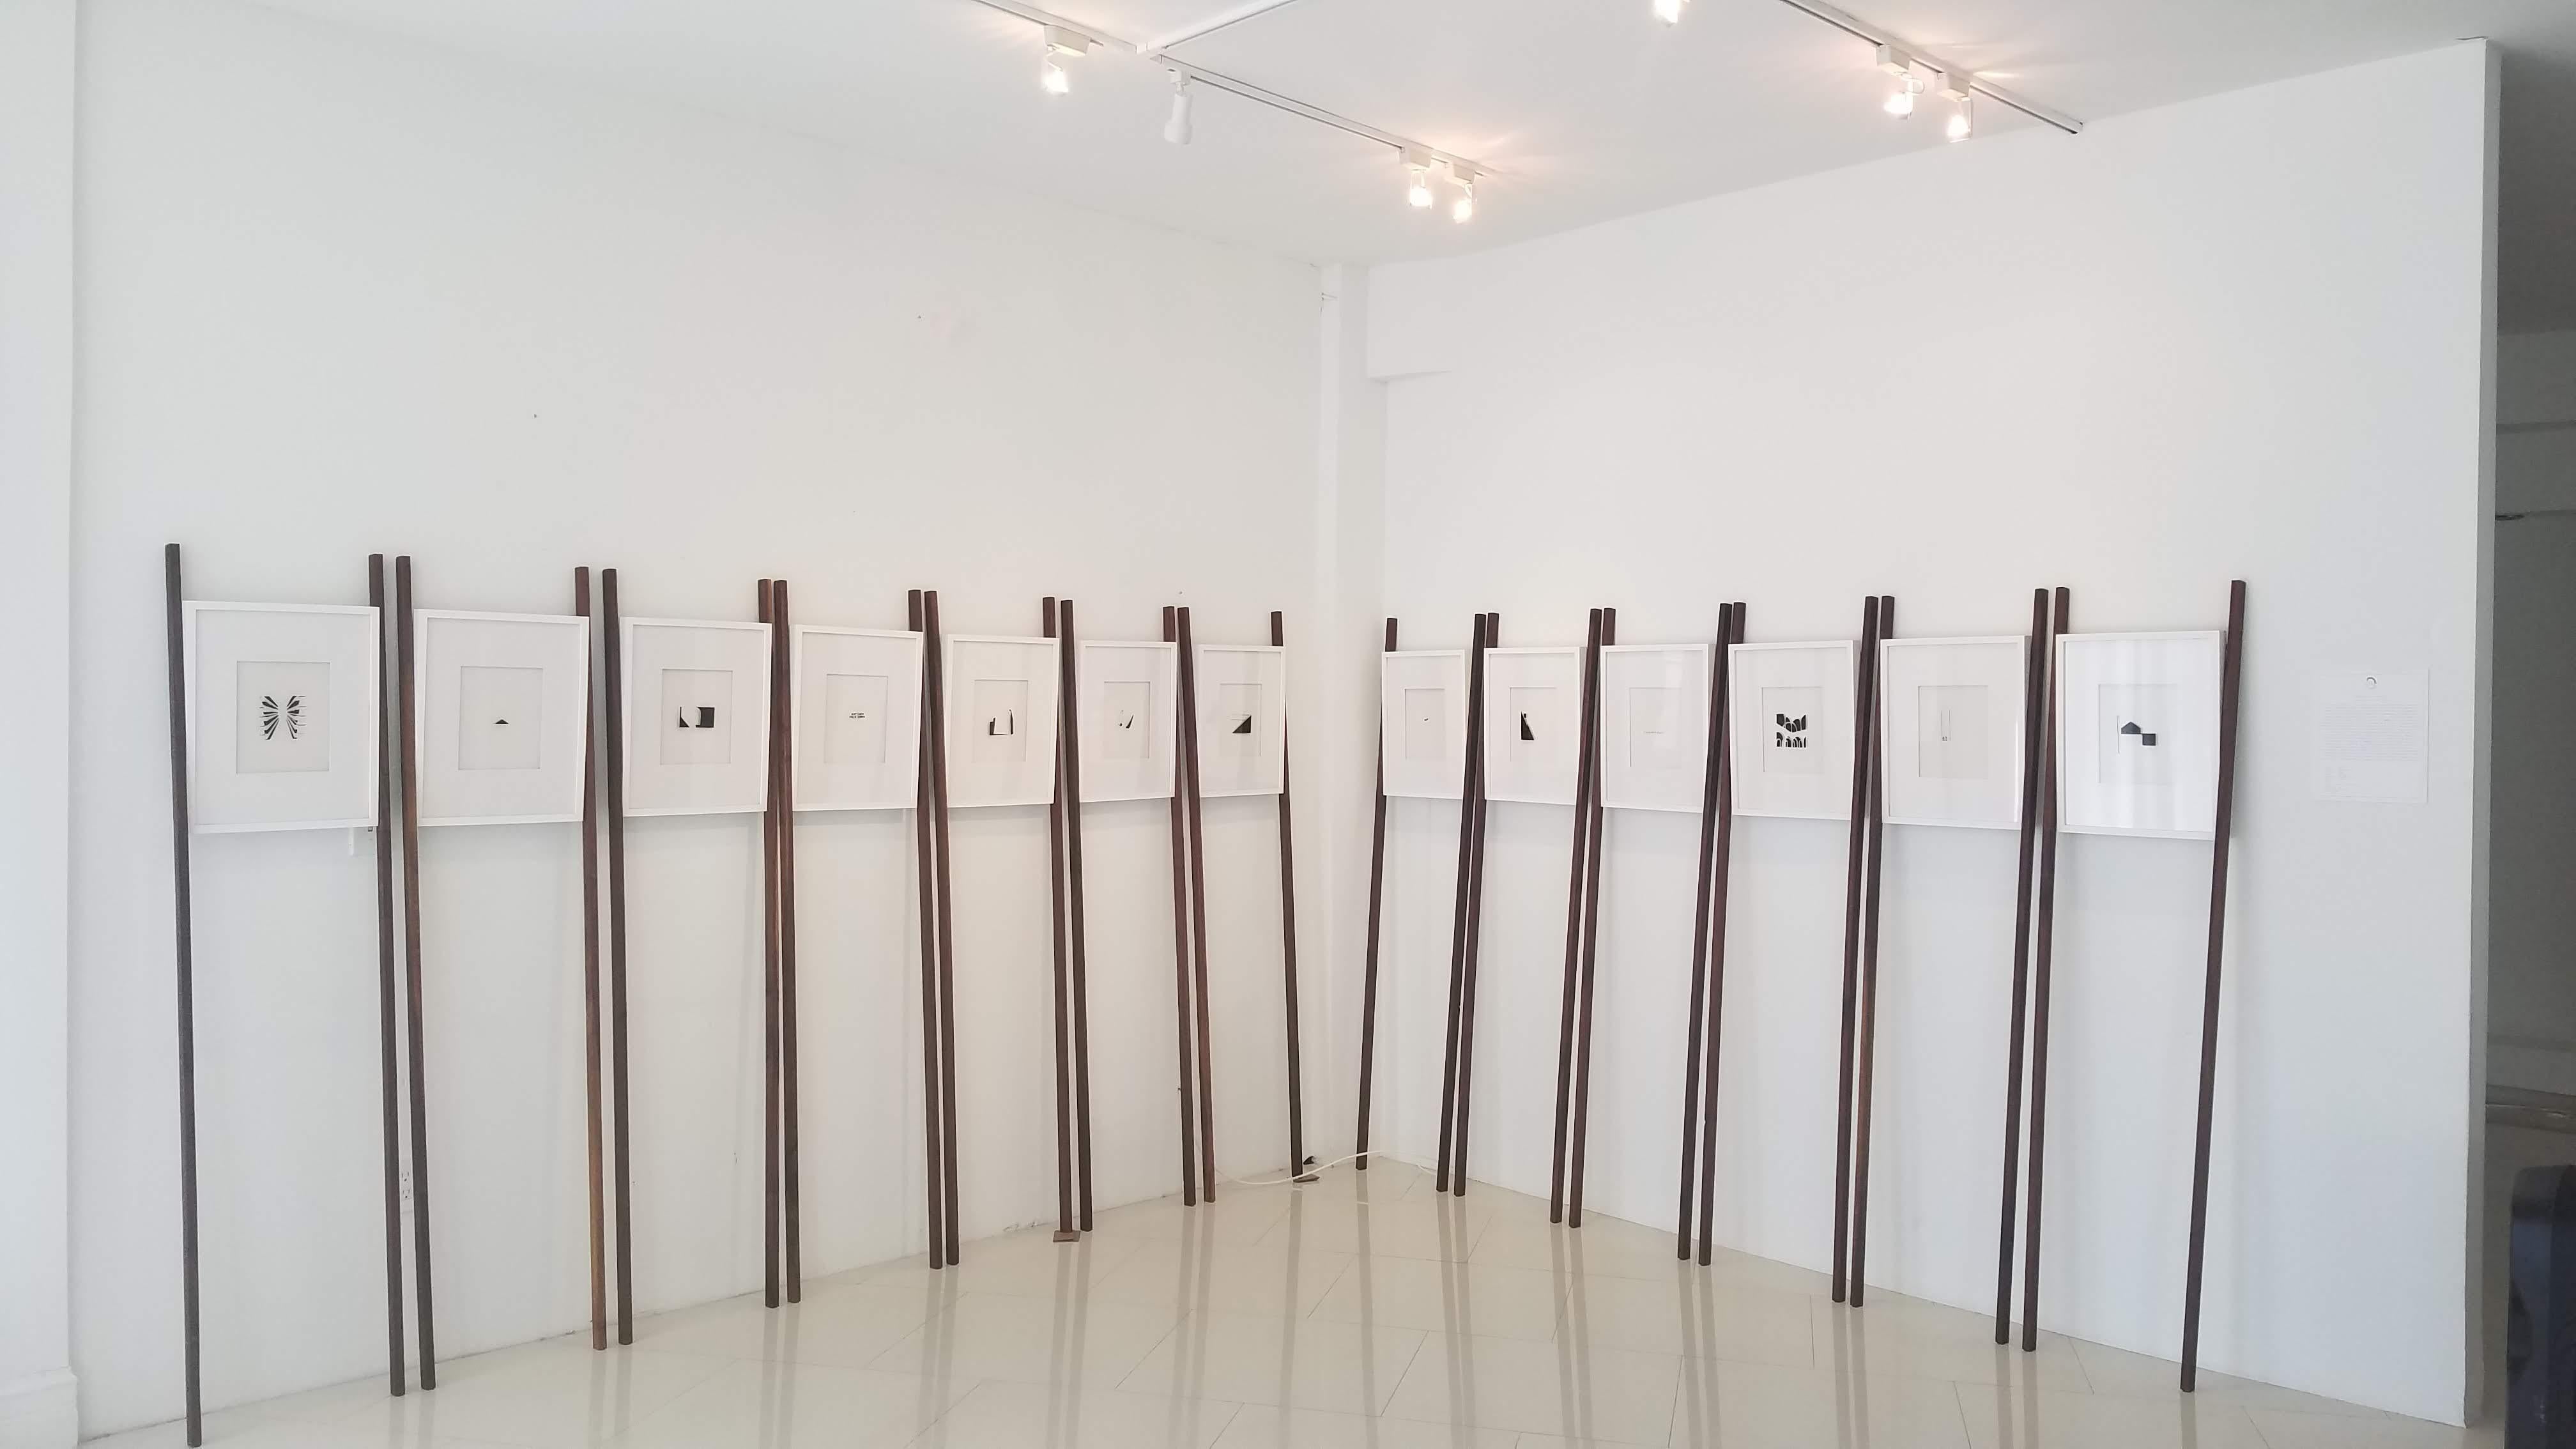 Wood, 2018 by Casey Waterman
Plaster, Glass, Vinyl, Walnut
One of a kind art wall installation of 16 pieces. 
Overall size: 72